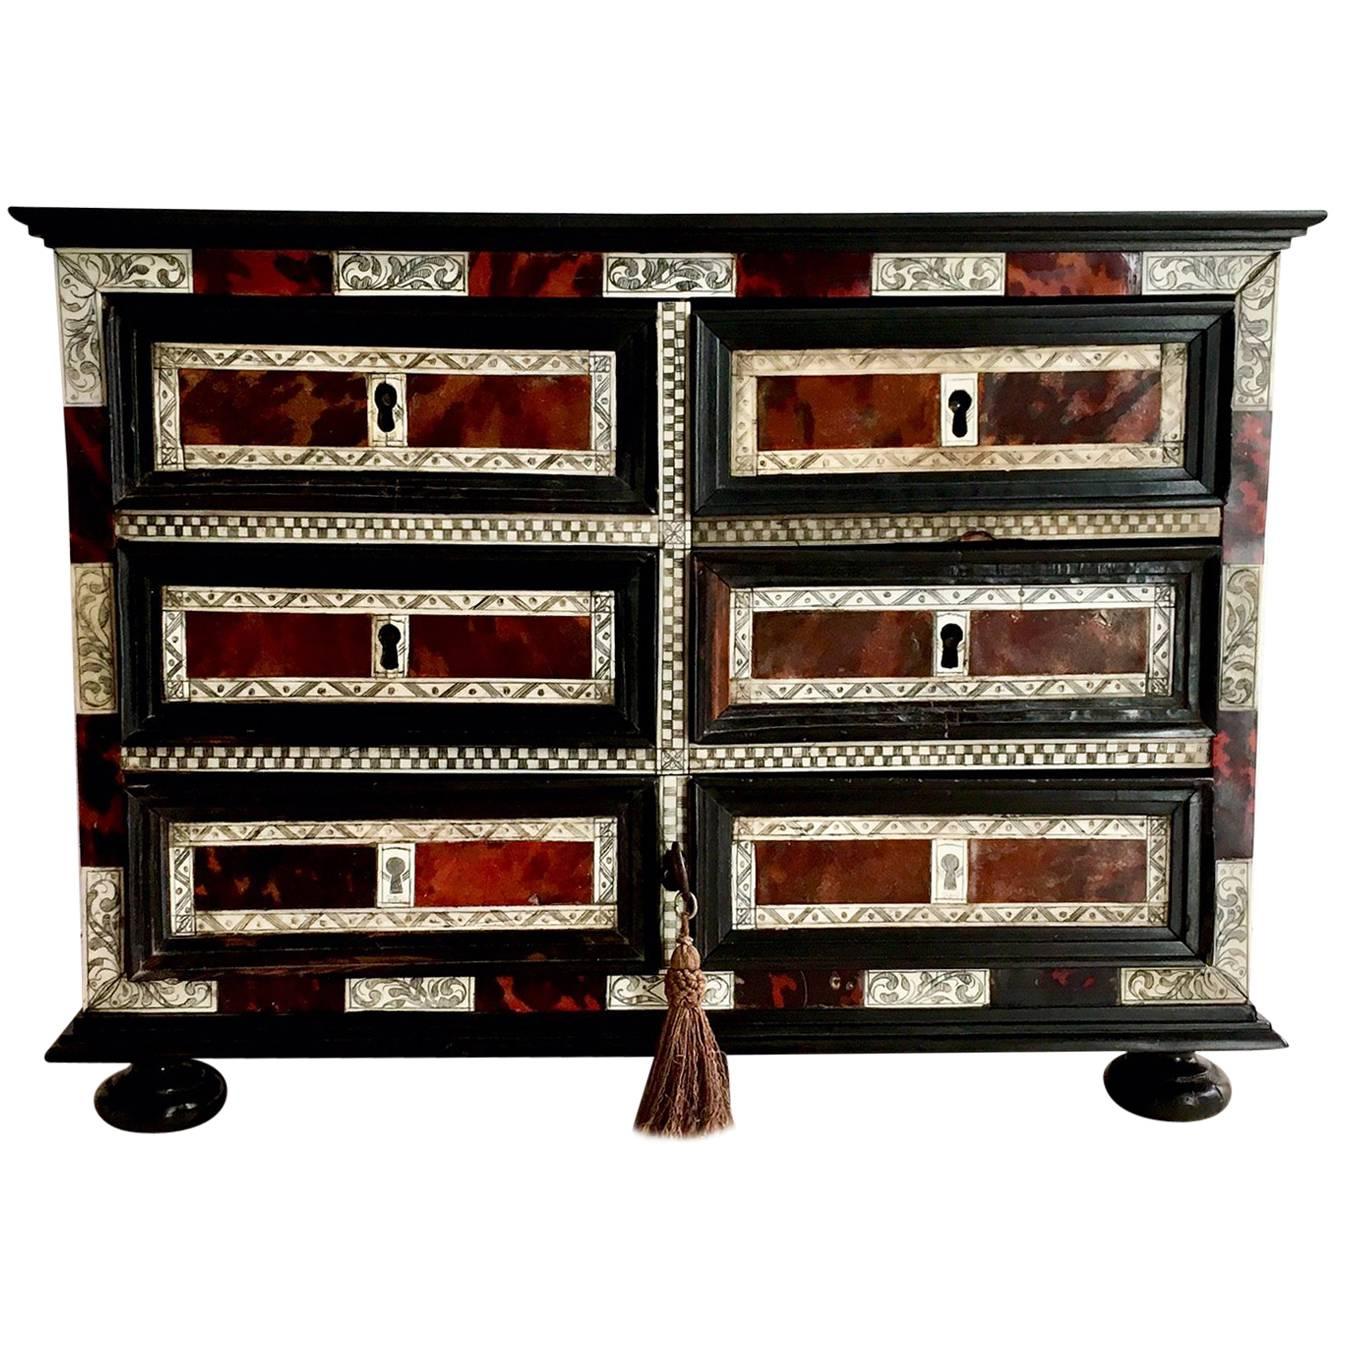 Spanish Colonial Cabinet "Bargueño"